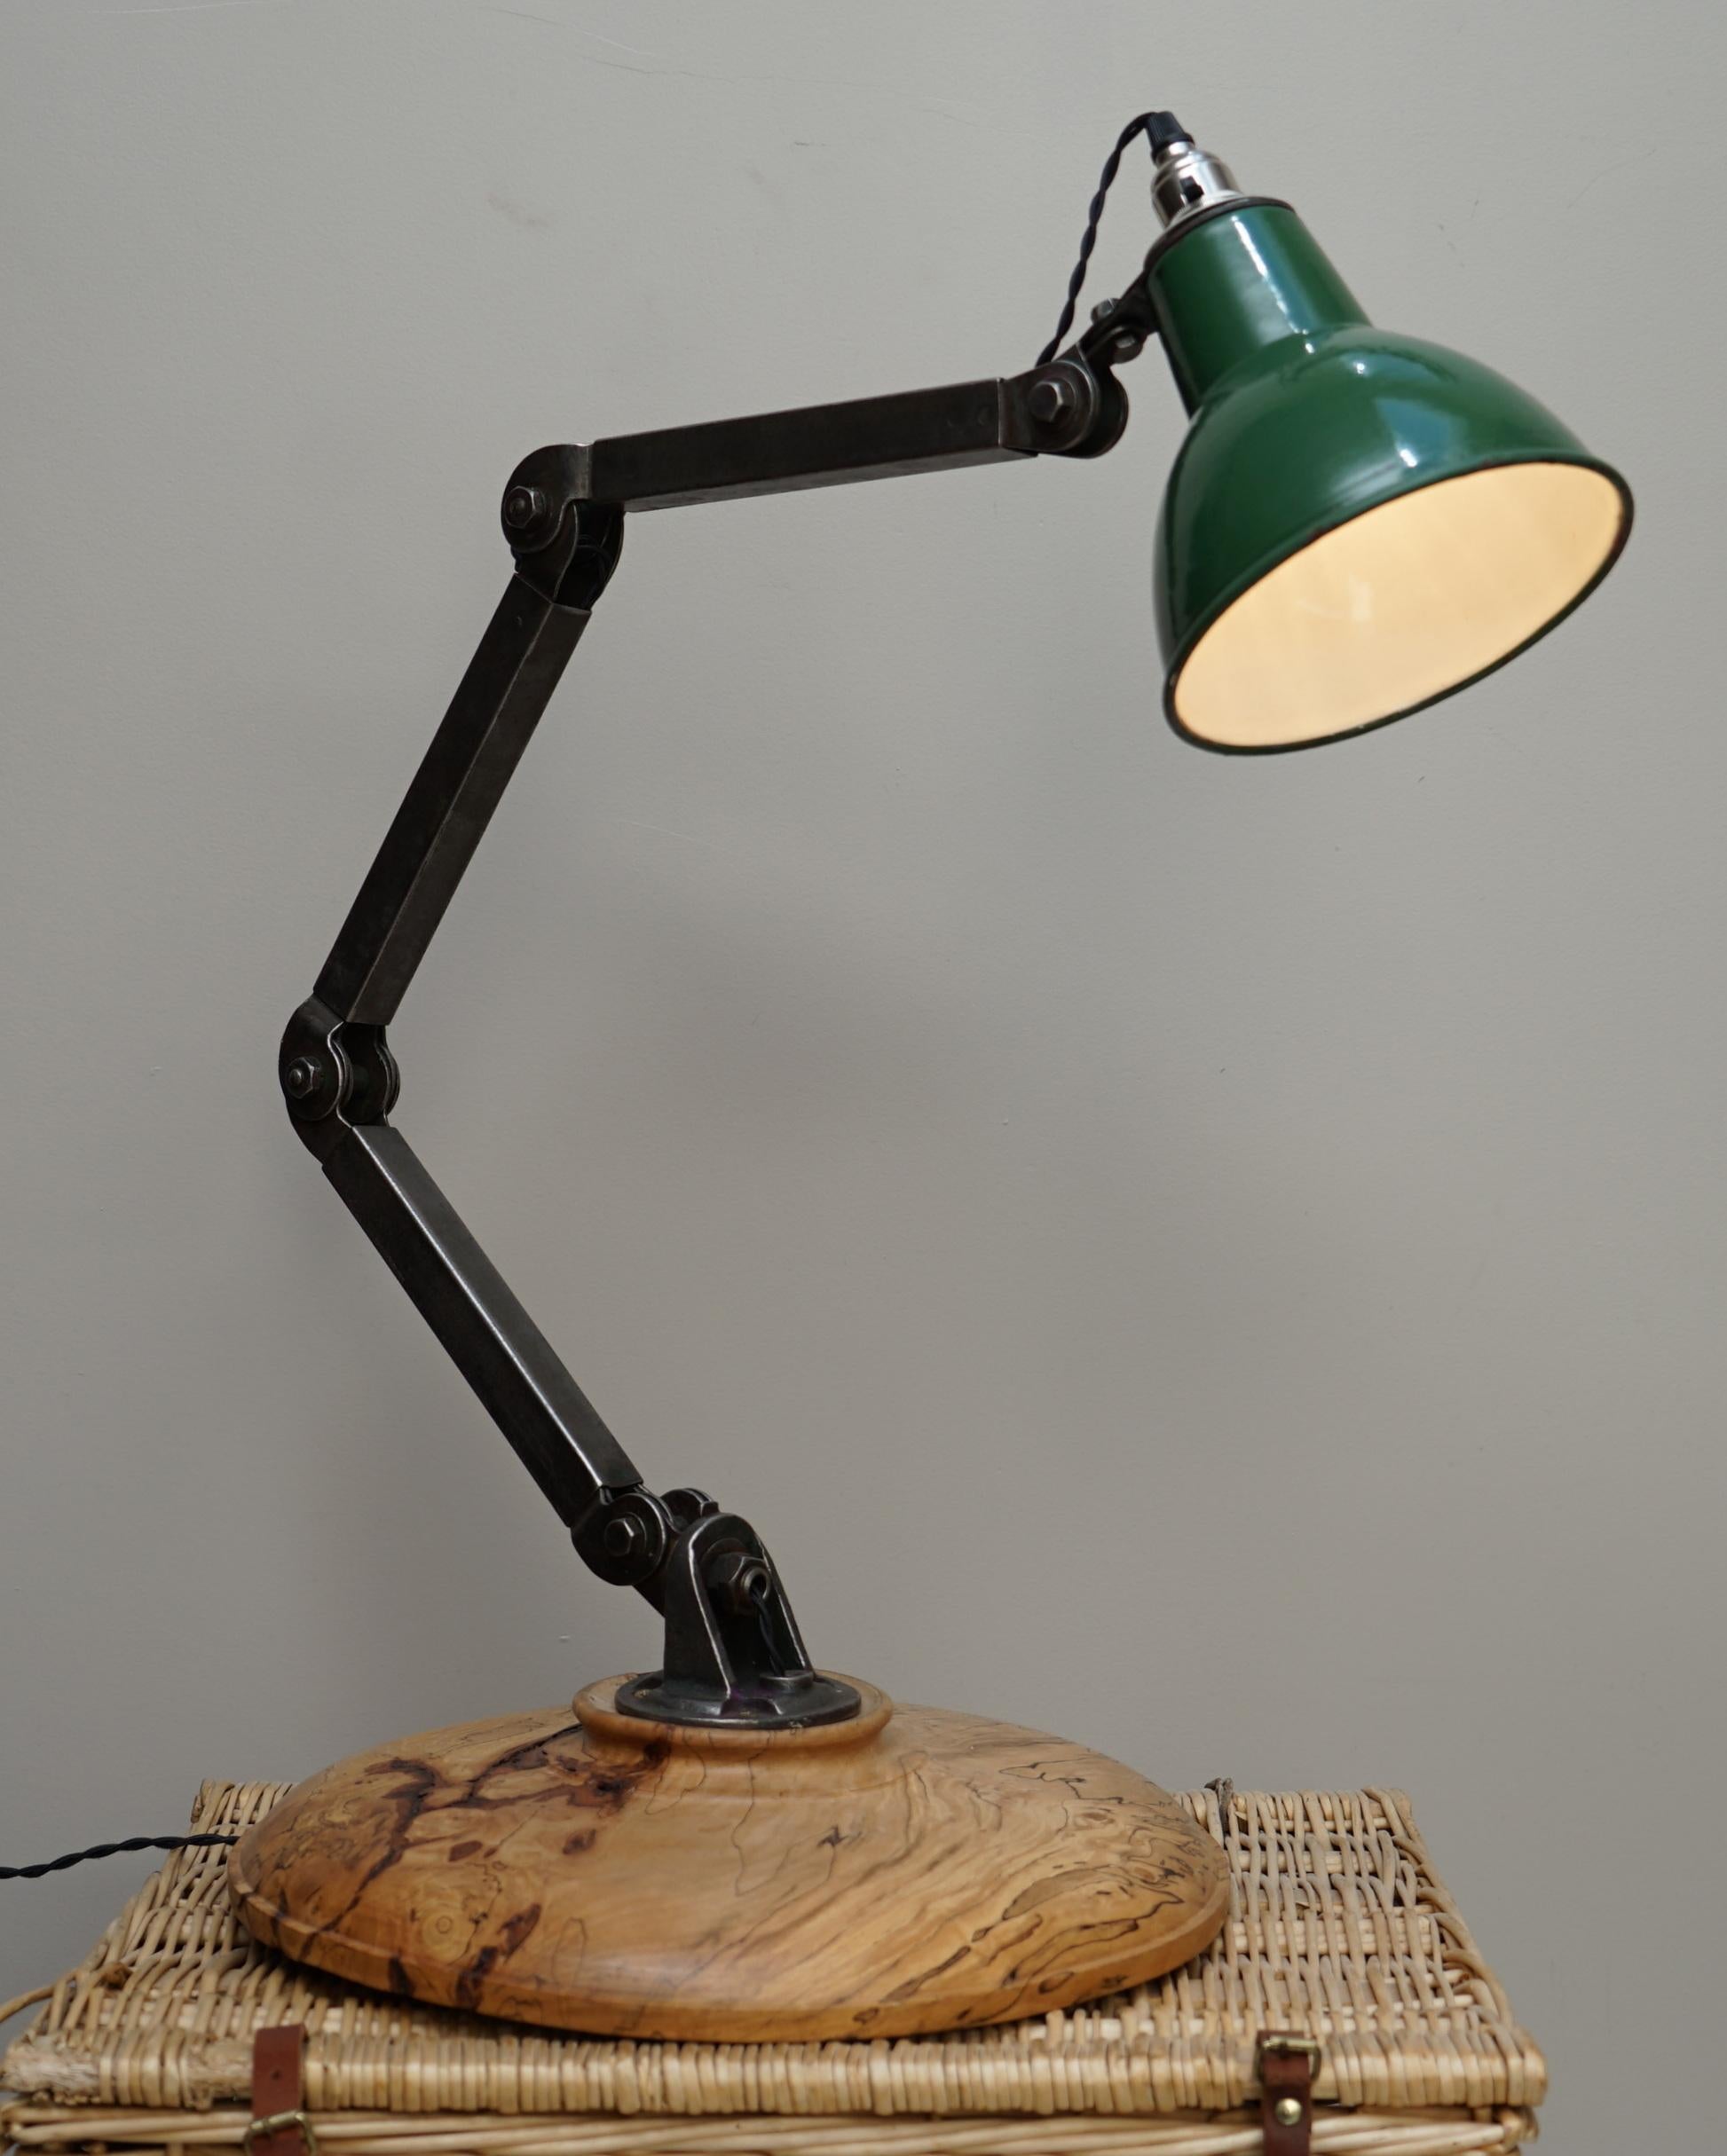 Wimbledon-Furniture

Wimbledon-Furniture is delighted to offer for sale this lovely vintage industrial steel four point articulation table lamp with over sized huge burr walnut base

A very good looking and well made piece, the base is massive